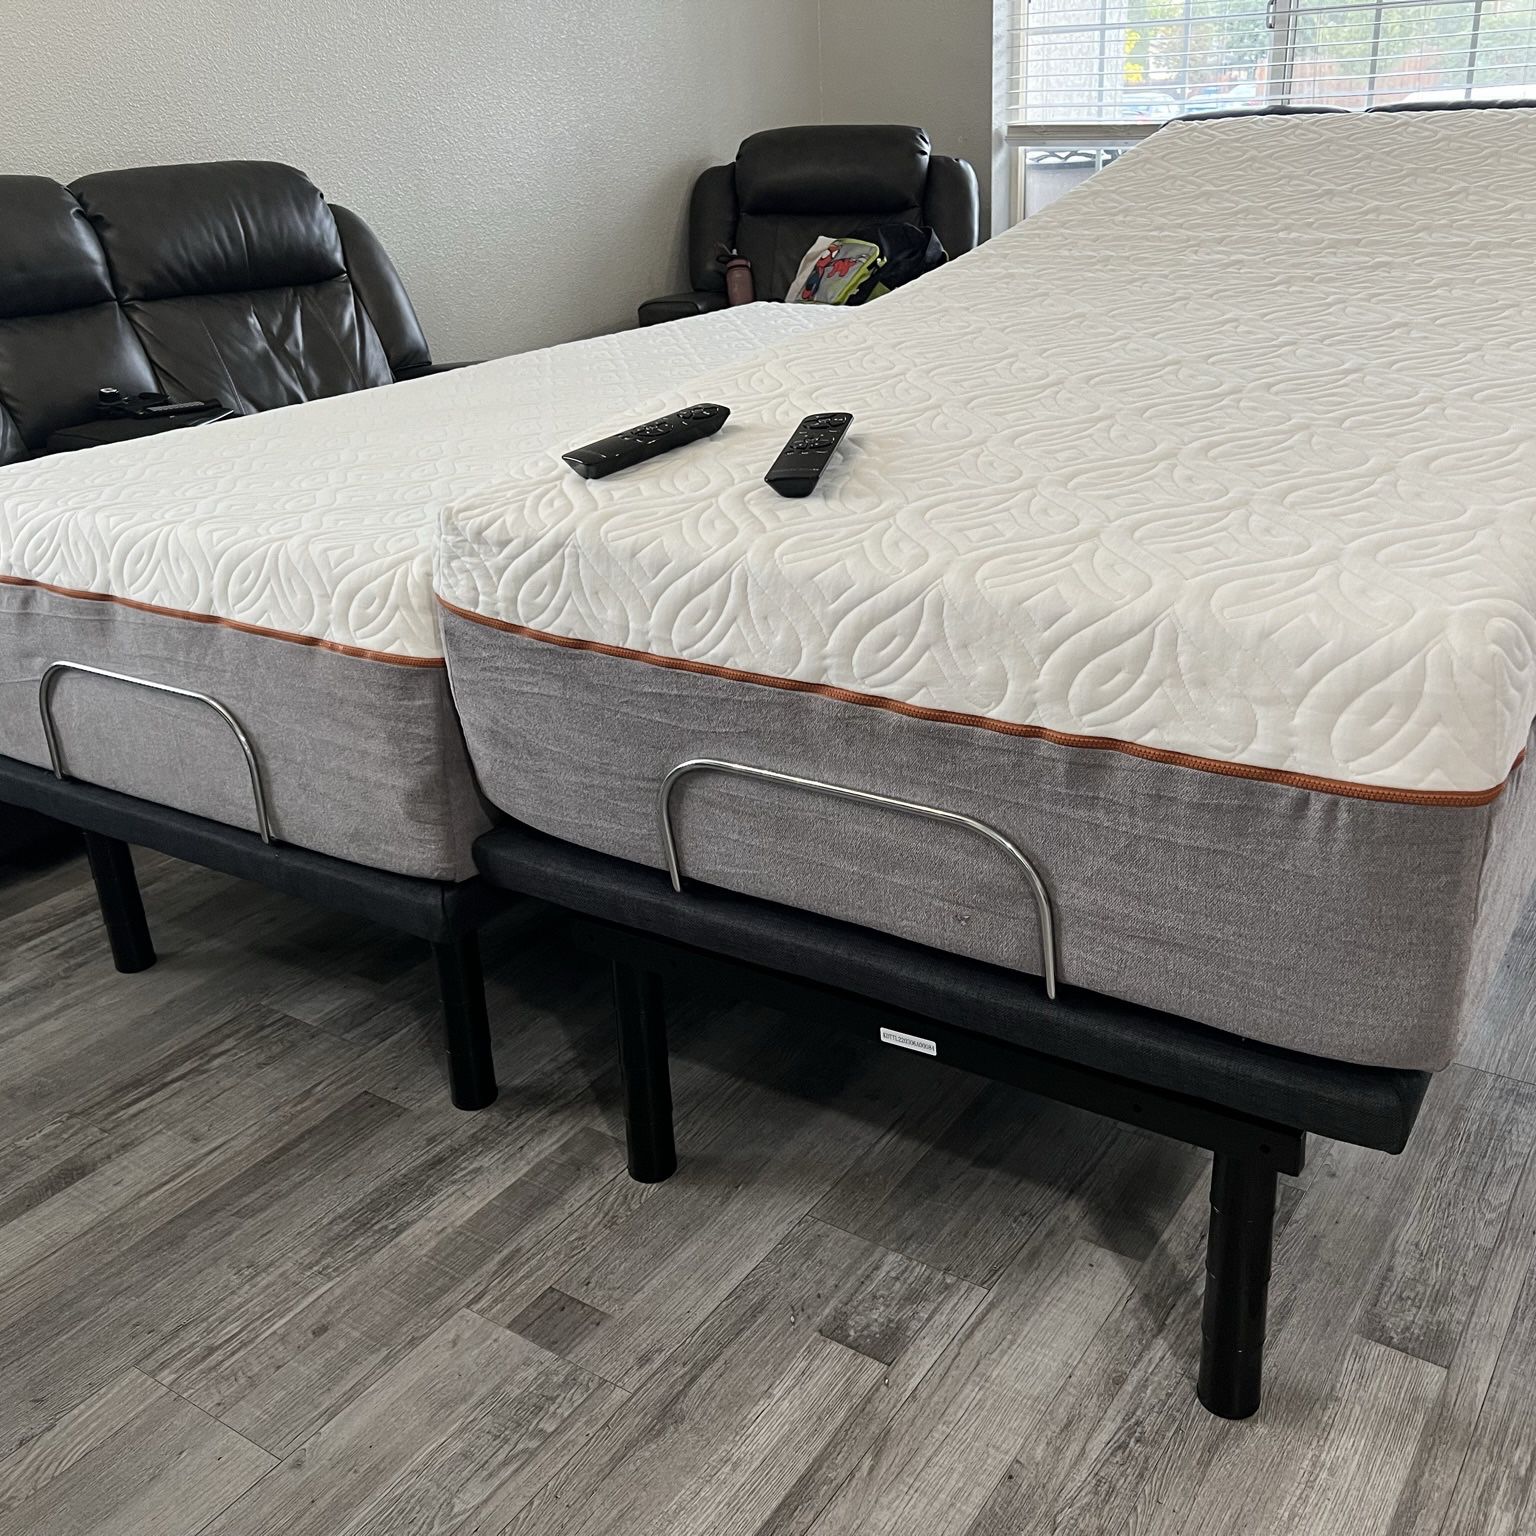 California King Bed ! Split Cal King Bed ! Firm Bed ! Adjustable Bed ! Movable Bed ! Motorized Bed ! Sleep Science Copper Firm Mattress ! Free Deliver